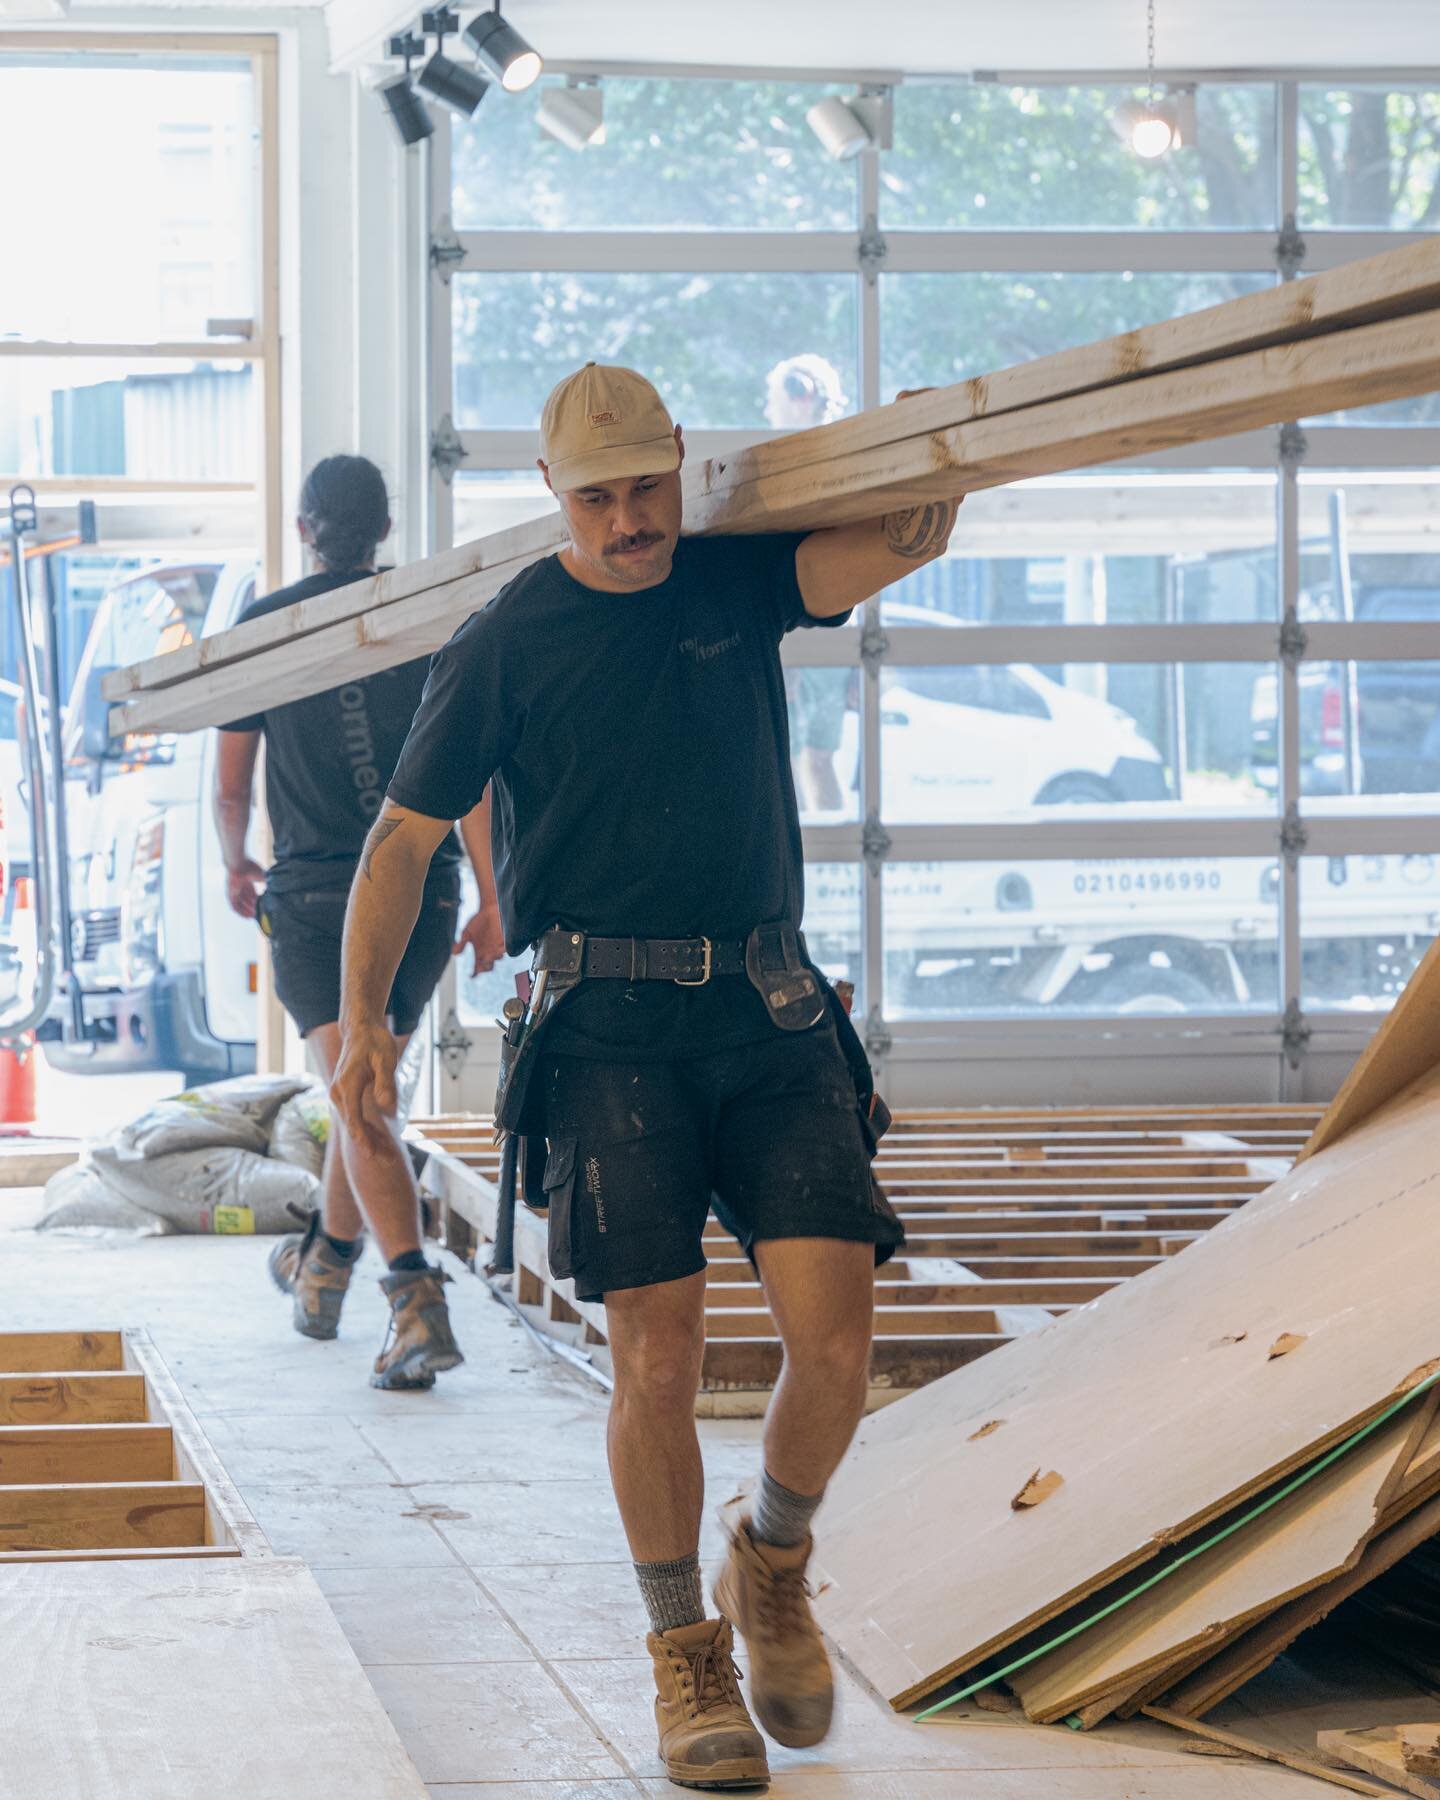 Troy doing a bit of heavy lifting for the greater good. Troy has been with us since the very beginning, starting as an adult apprentice and quickly moulding into a highly capable builder. 

An absolute asset to the team.